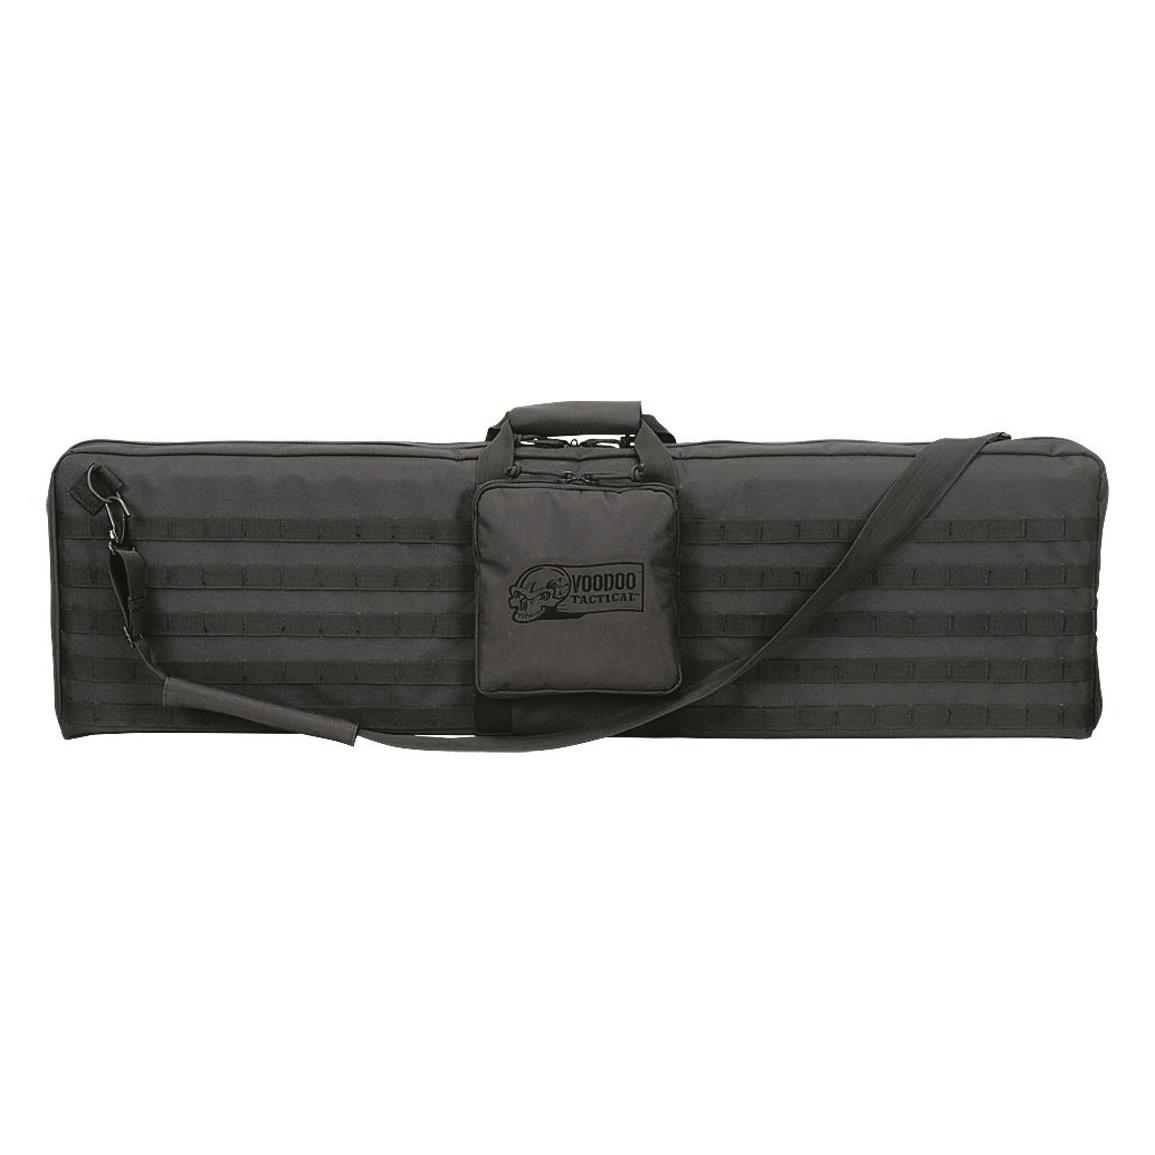 Voodoo Tactical 44" Single Rifle Padded Weapons Case, Black